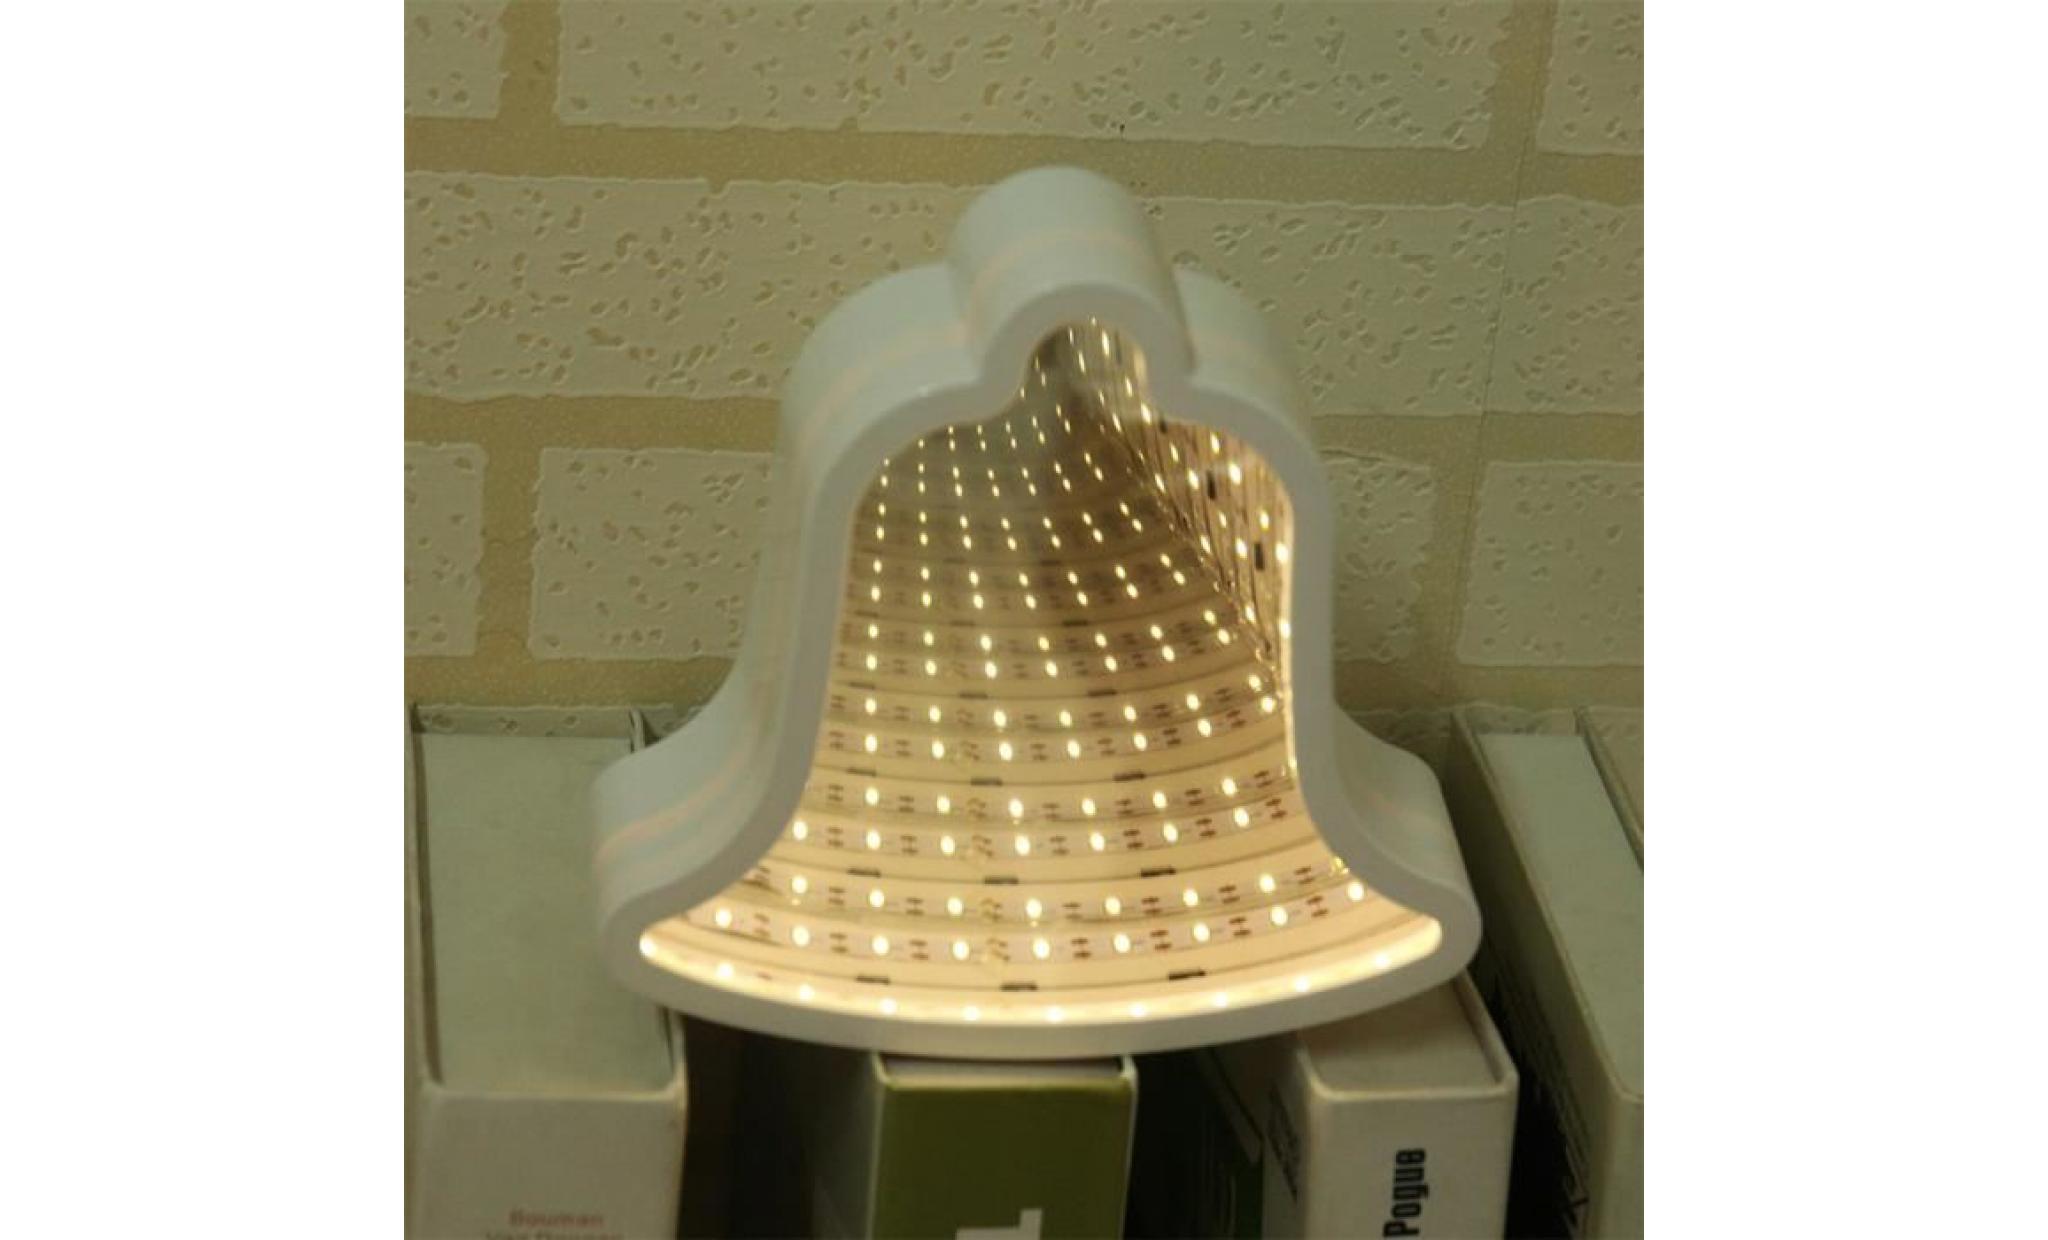 marquee led night light chambre tunnel modeling home décor batterie lampe mur@zoozipo2921 pas cher